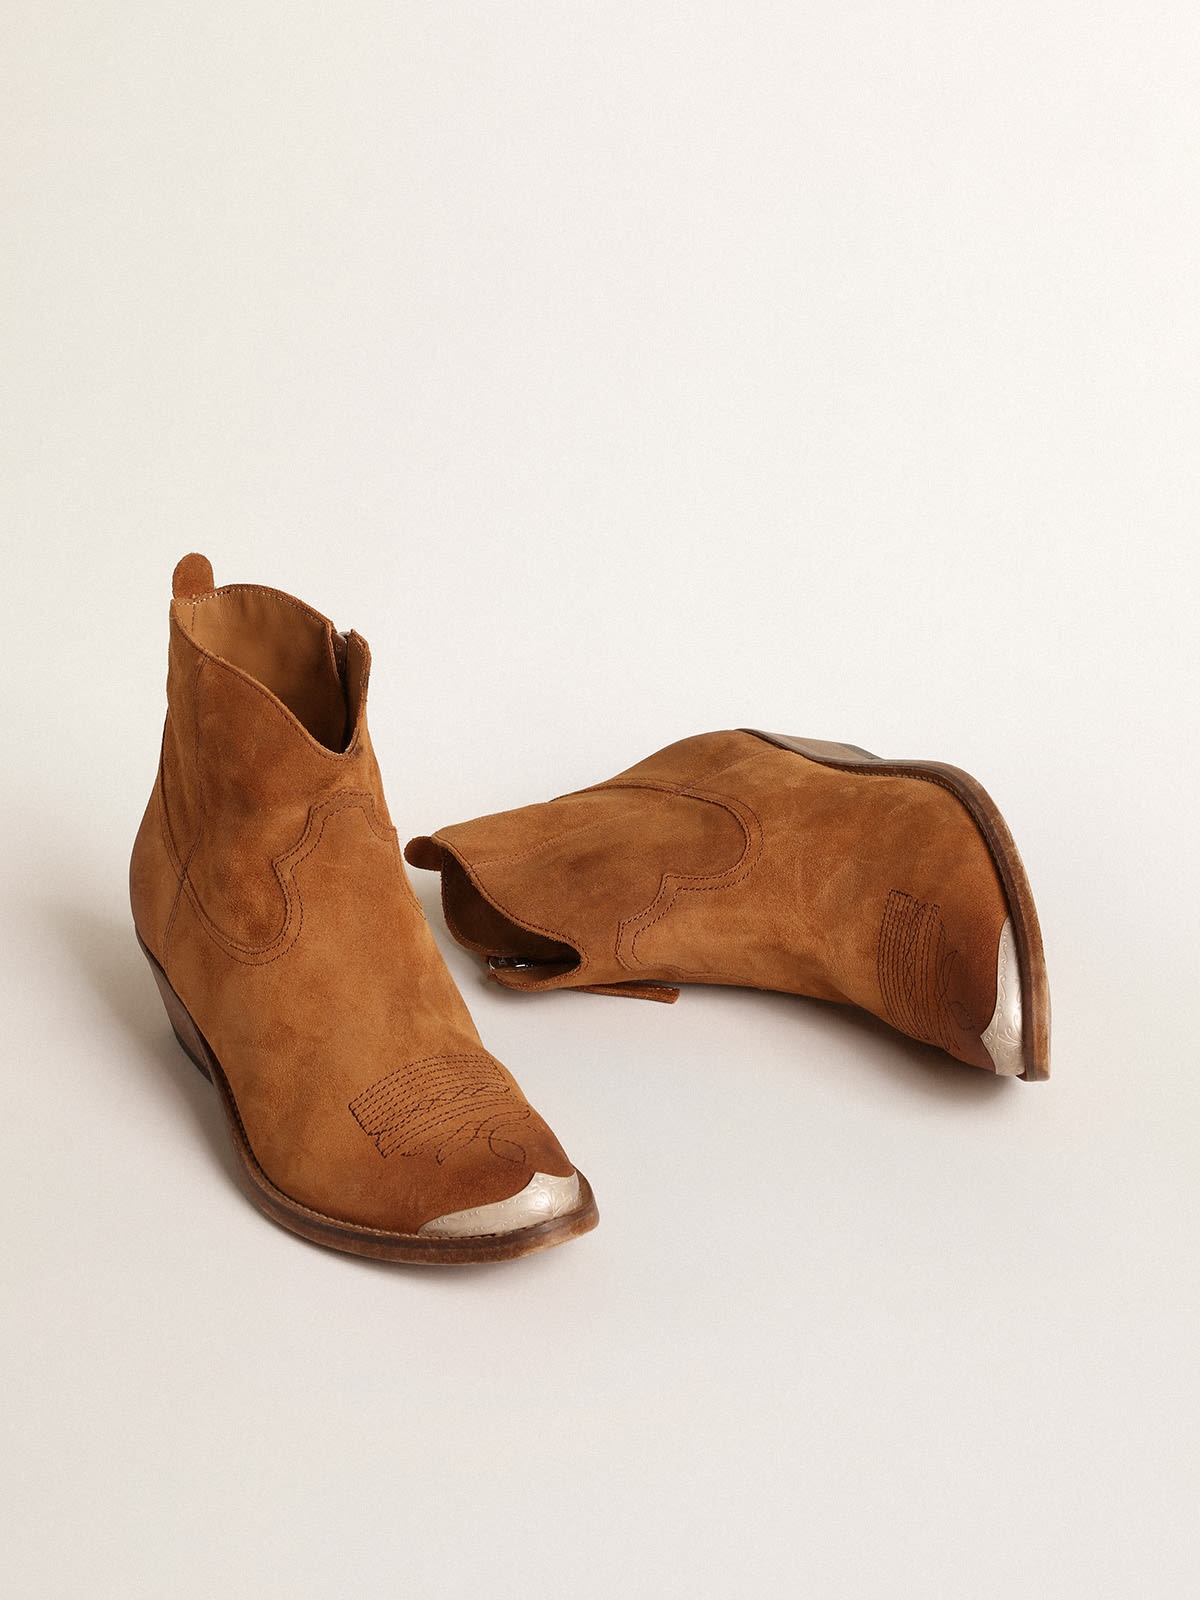 Young ankle boots in cognac-colored suede - 2